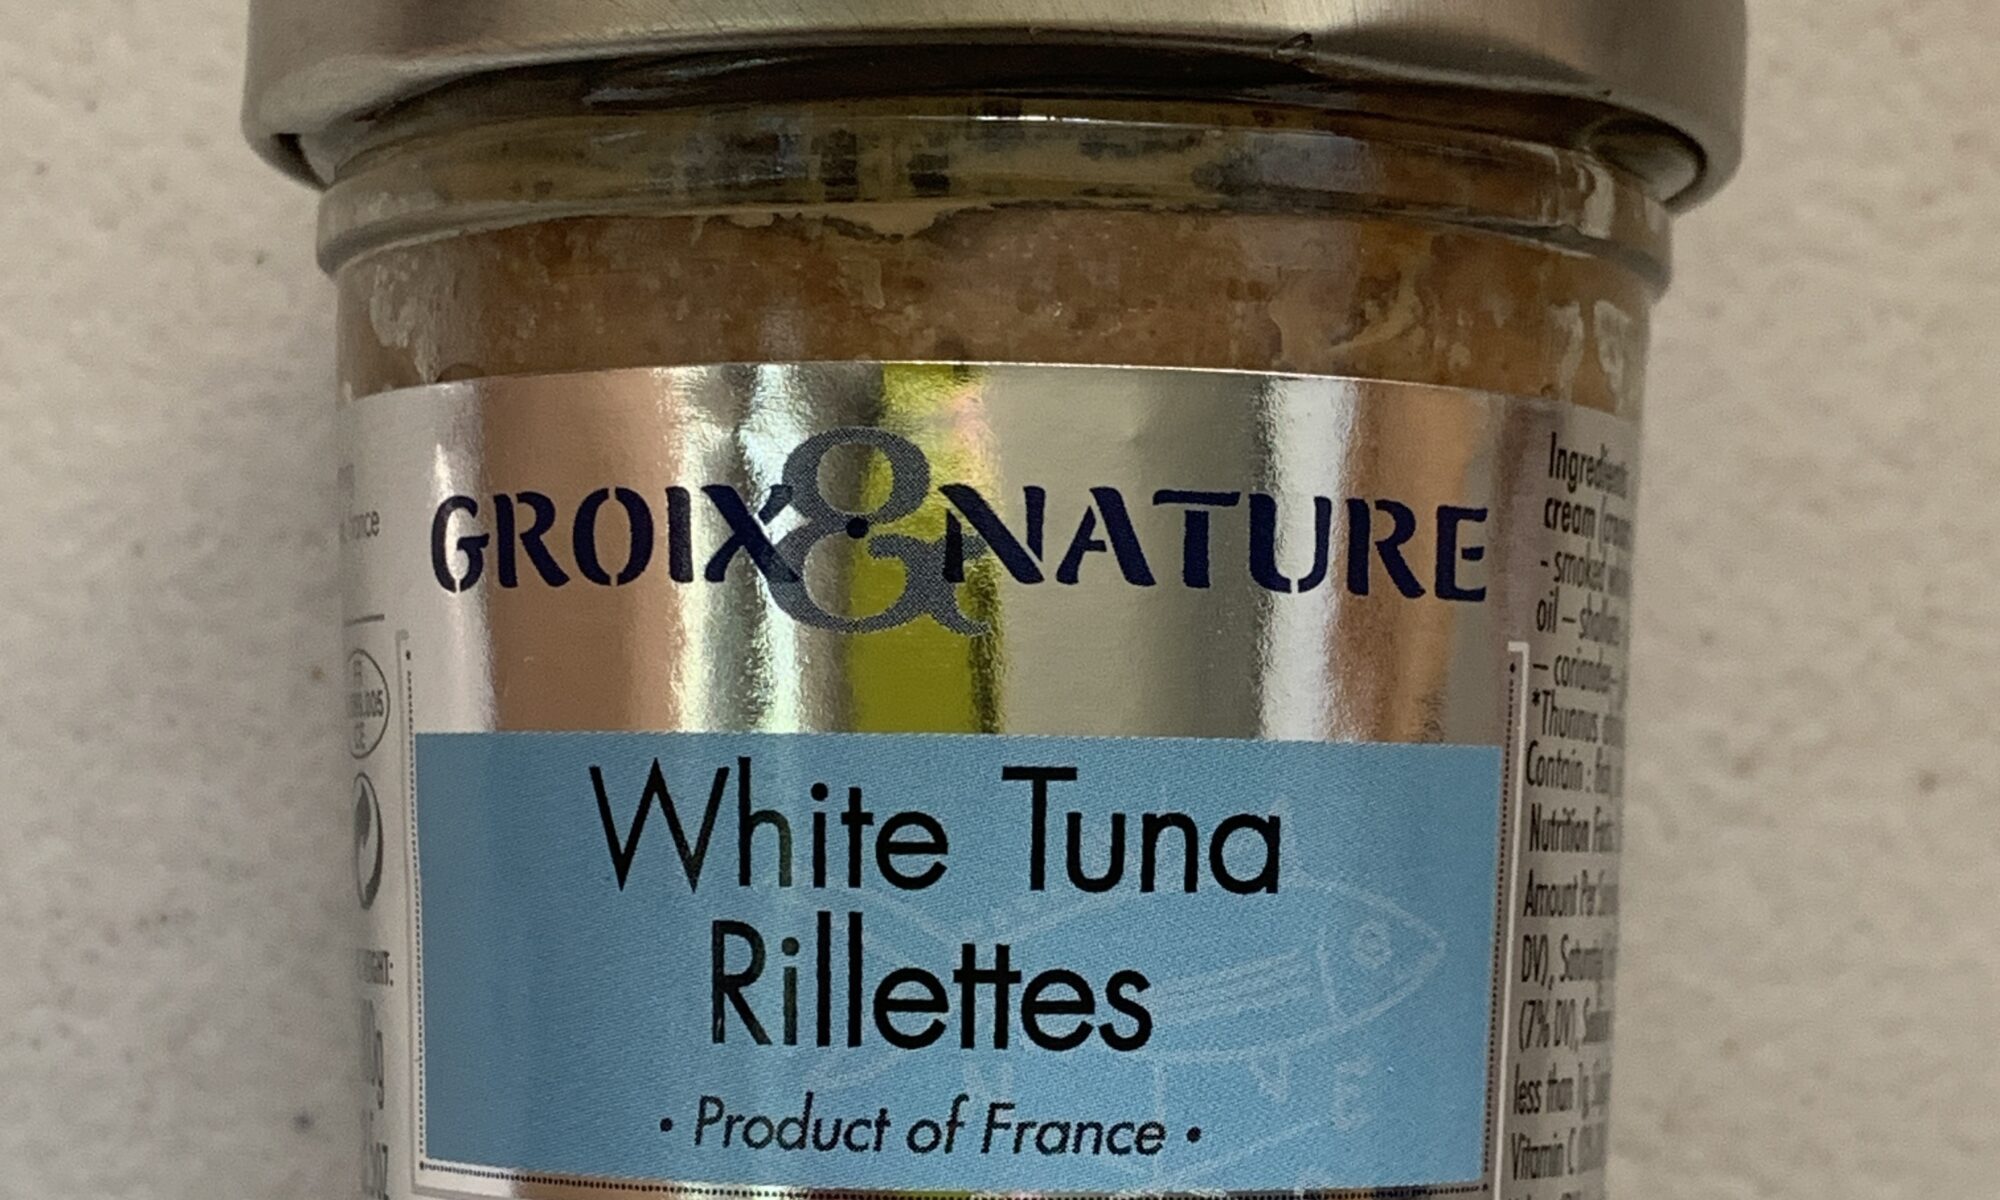 Image of the front of a jar of Groix & Nature White Tuna Rillettes